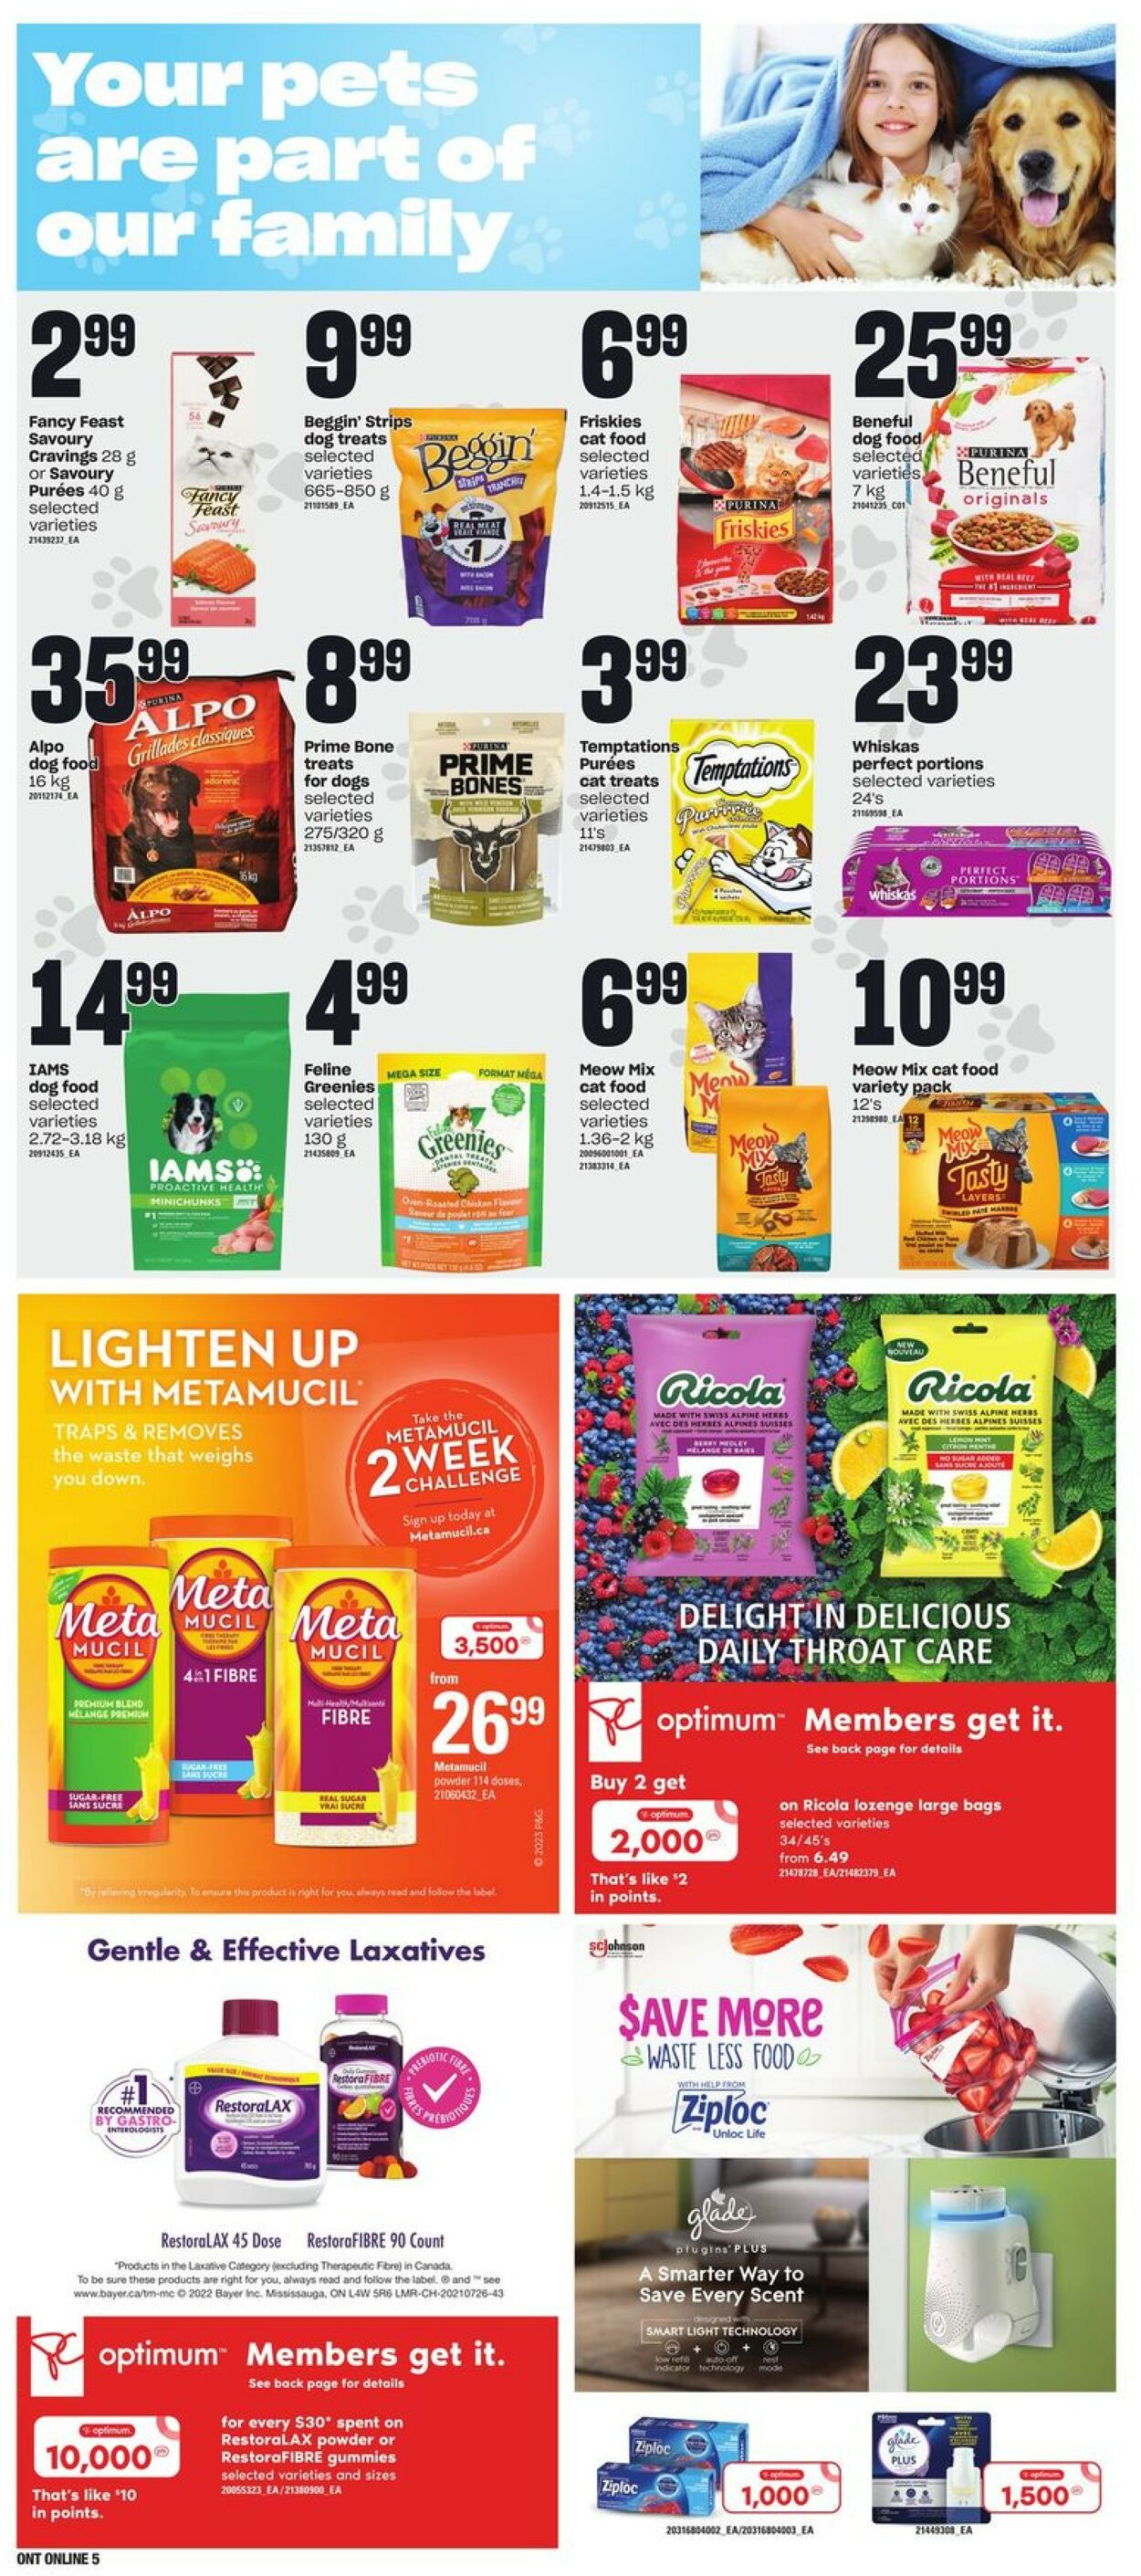 Zehrs Flyer from 02/16/2023